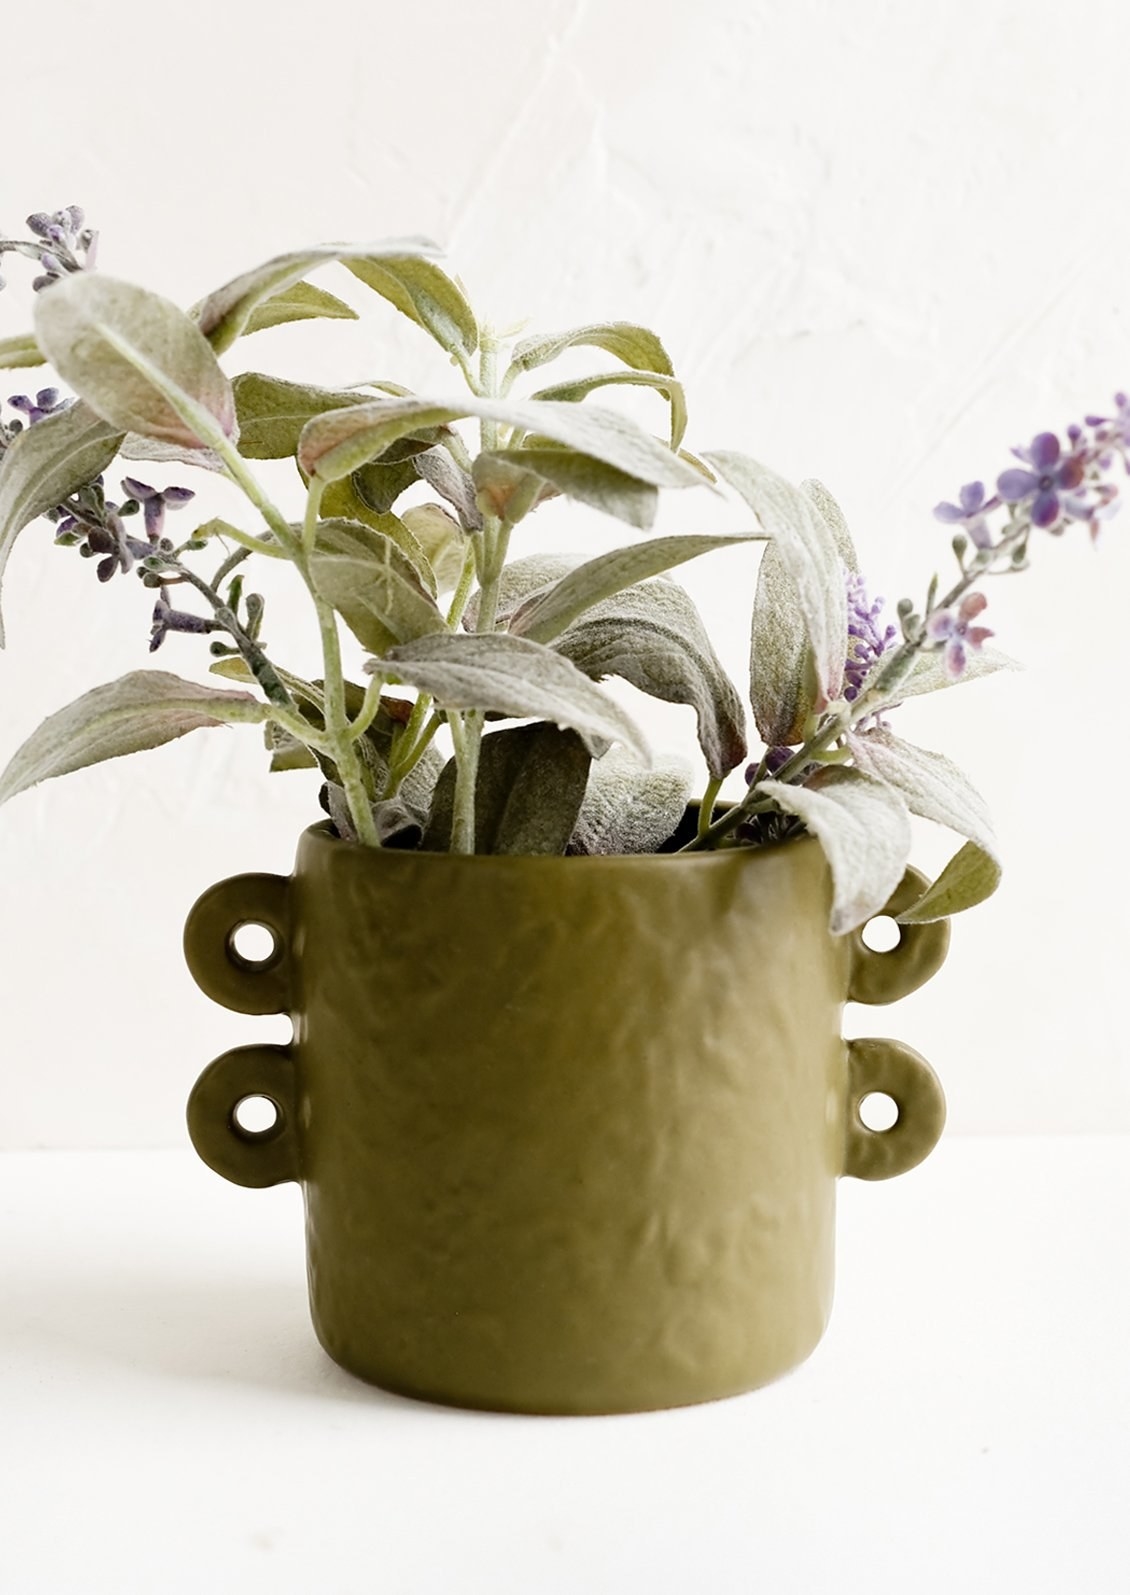 the green planter which has two small looped handles on each side